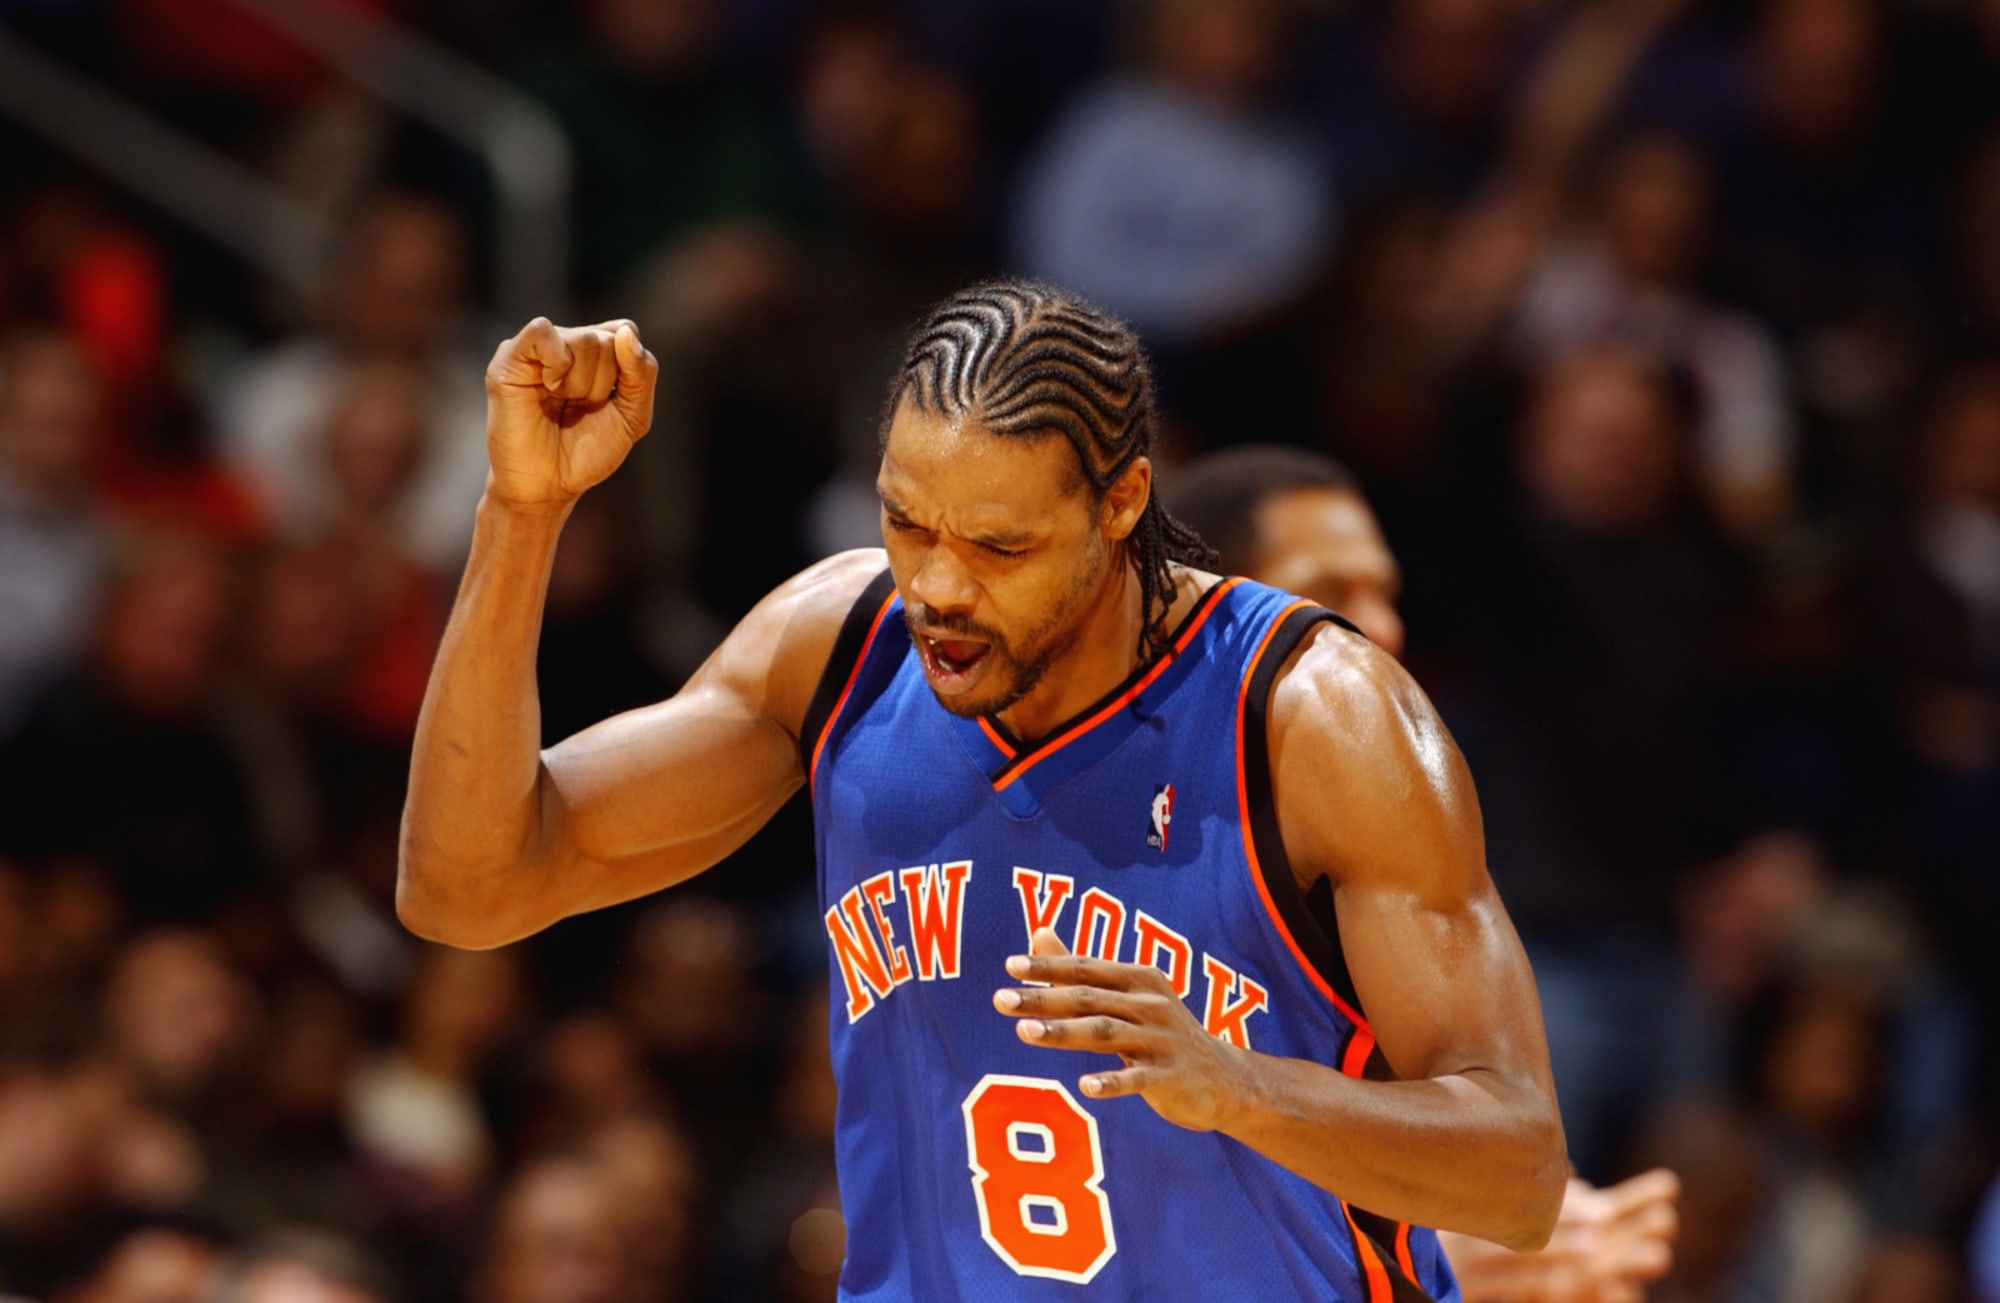 Latrell Sprewell of the New York Knicks attempts a dunk against